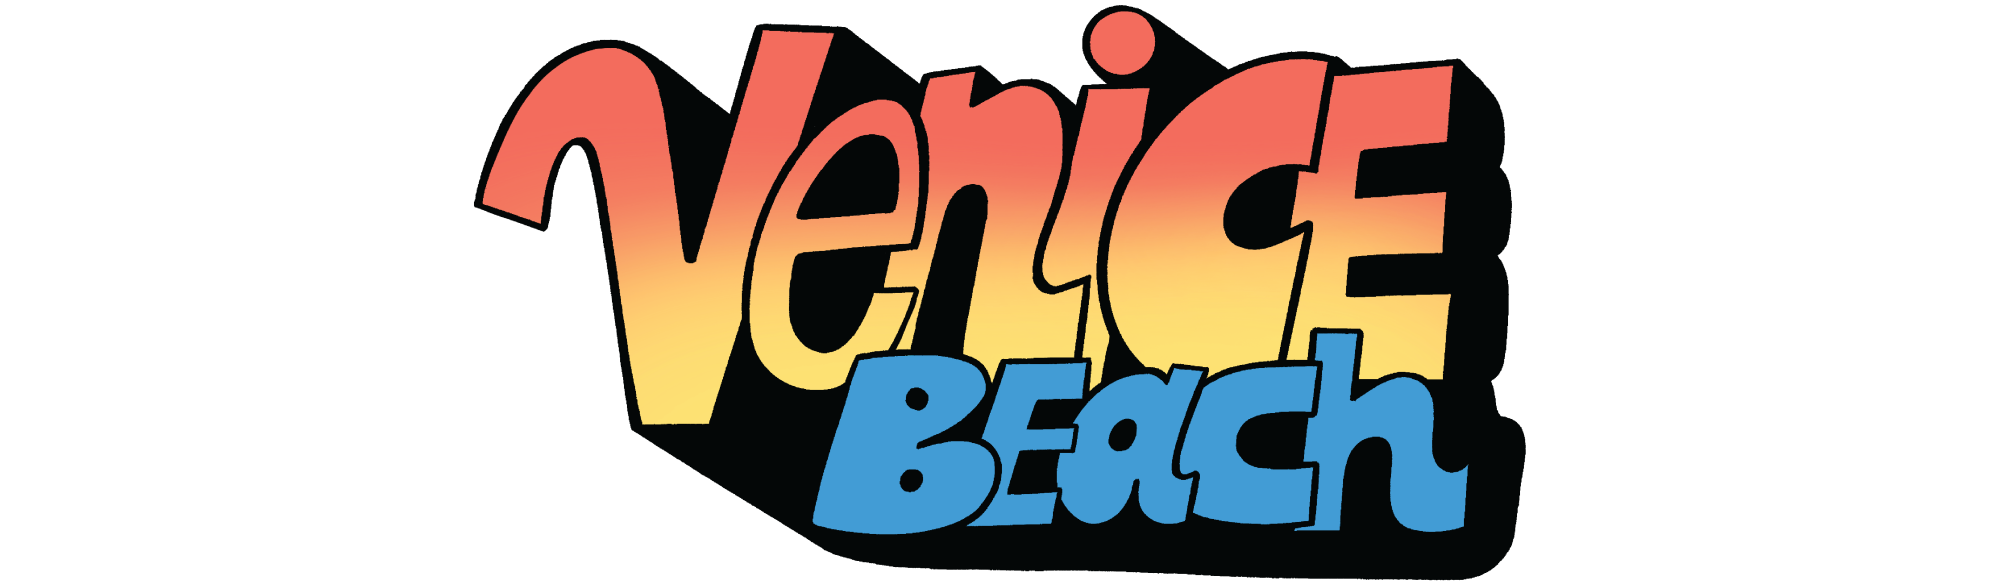 Colorful typography saying Venice Beach